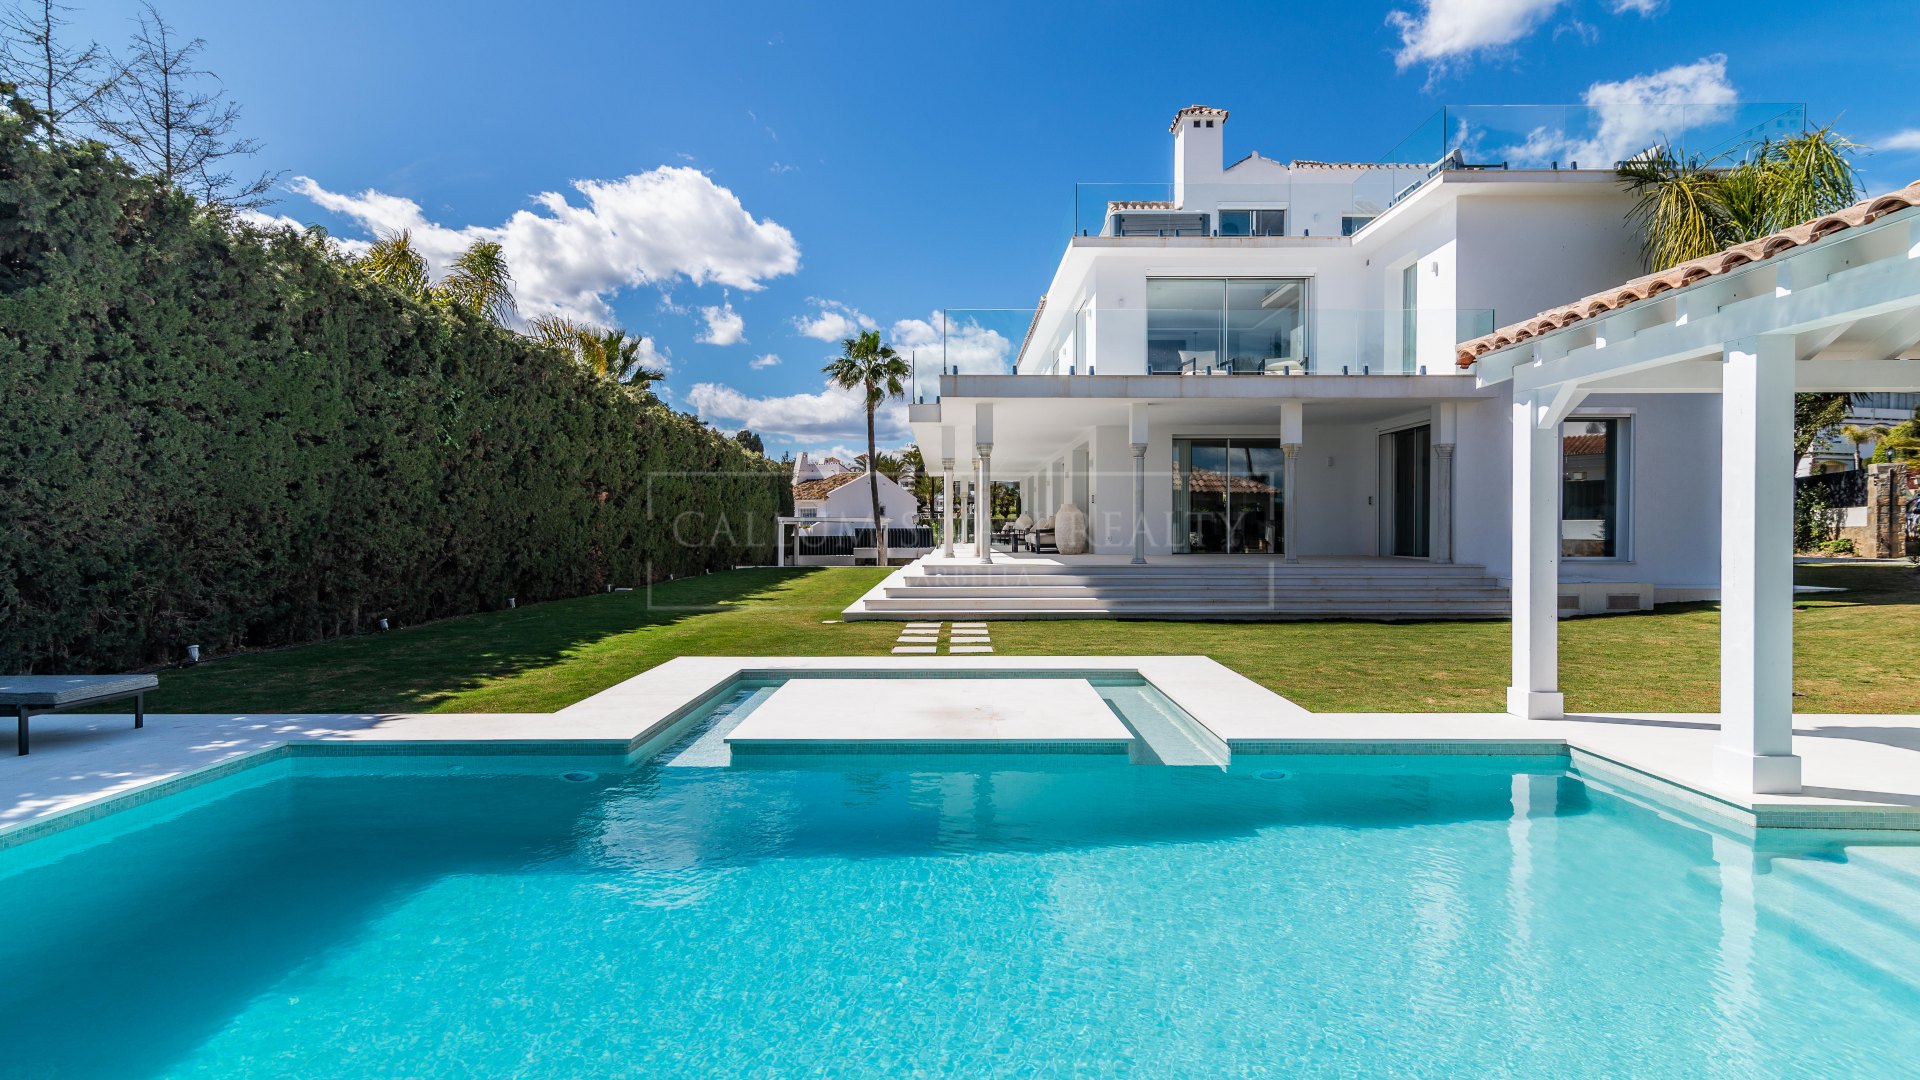 Sophisticated villa with sea views, within walking distance to Puerto Banus